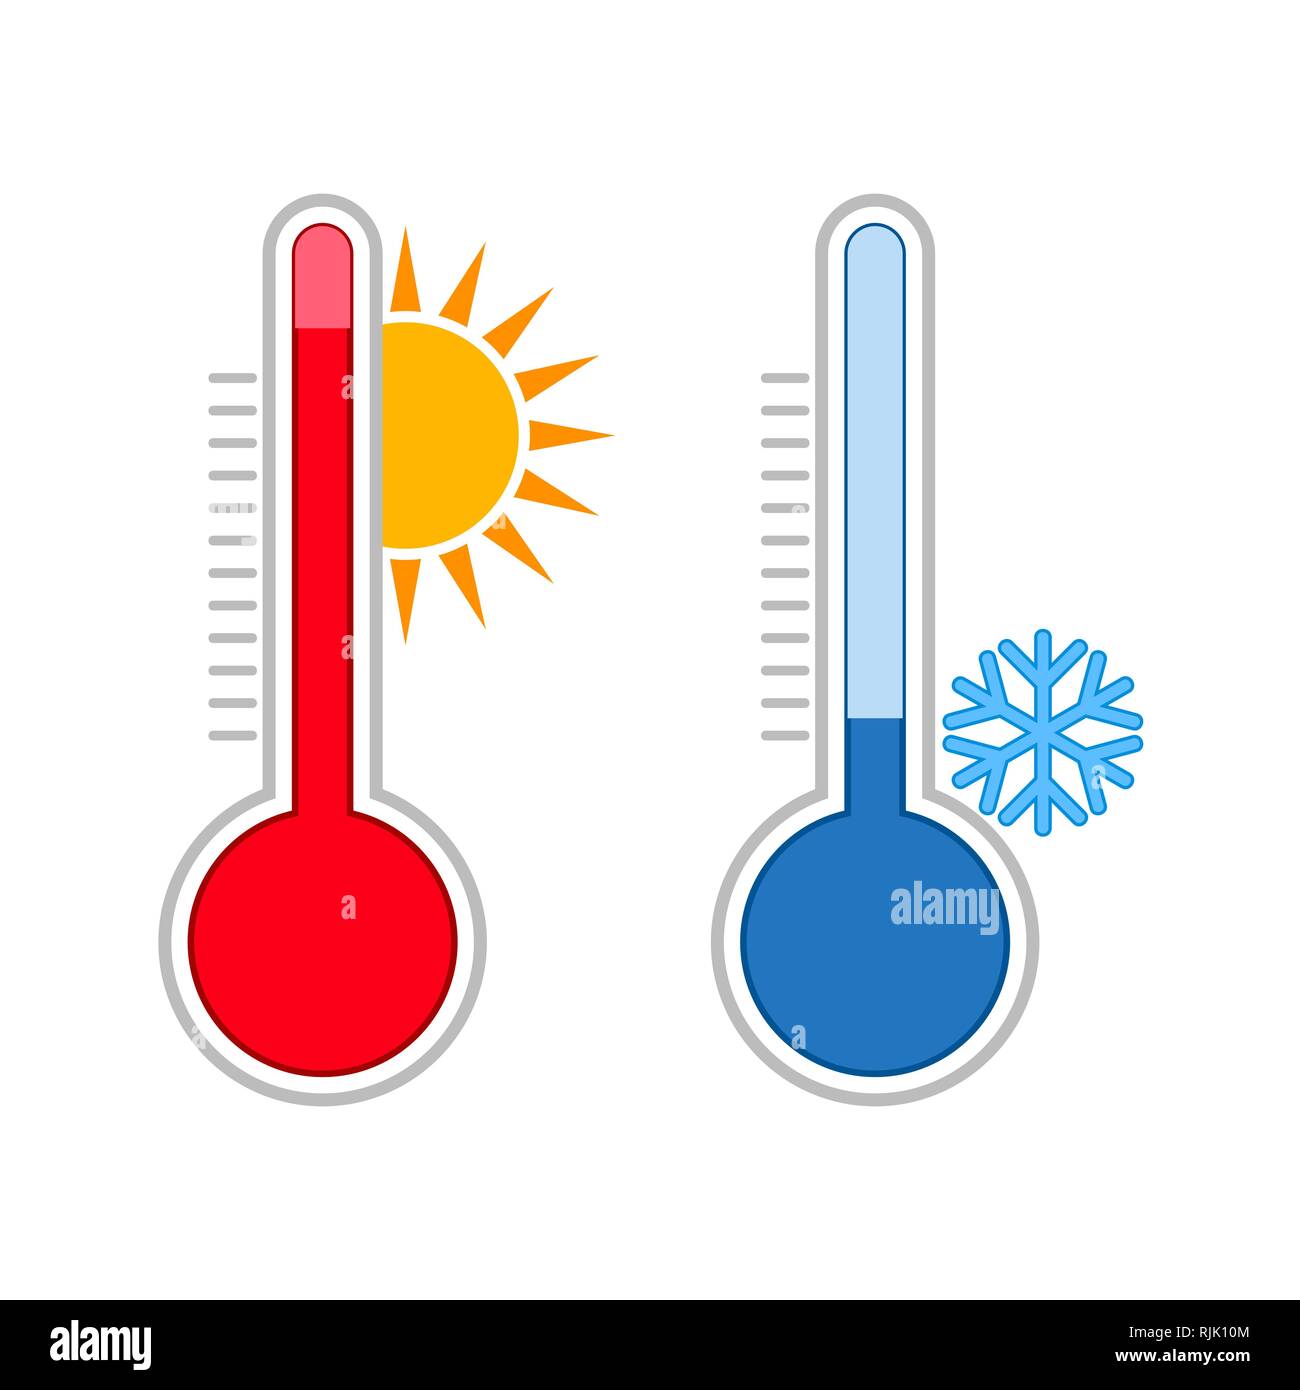 https://c8.alamy.com/comp/RJK10M/meteorology-thermometers-measuring-hot-and-cold-temperature-snowflake-sun-icons-RJK10M.jpg